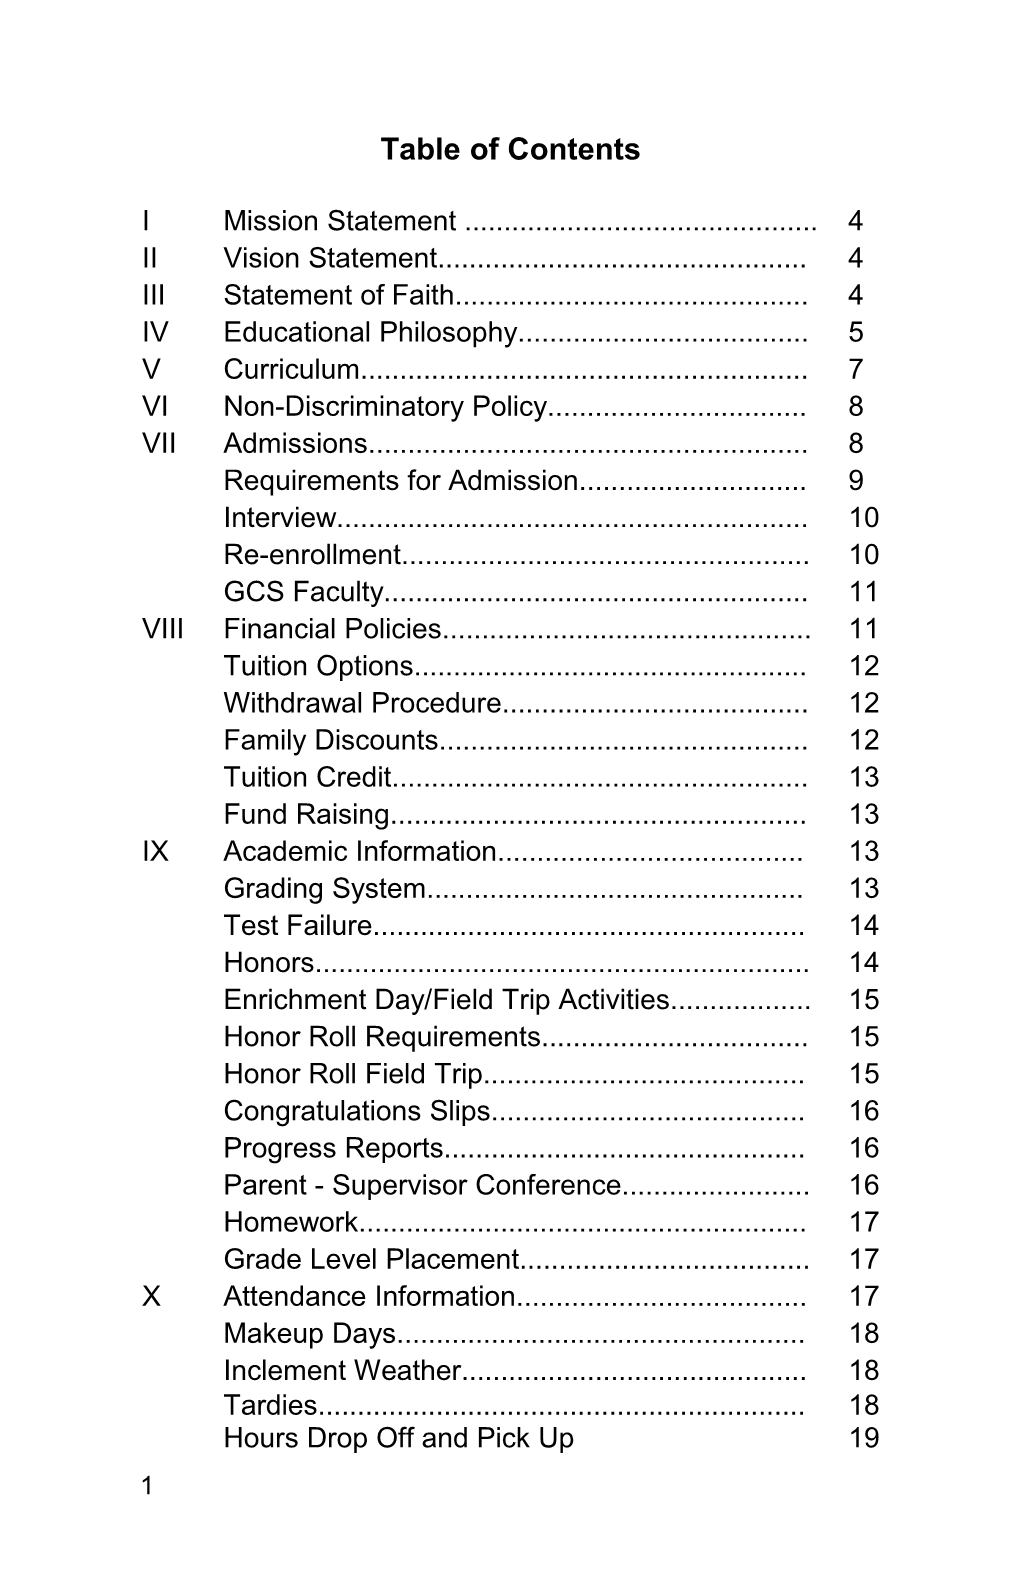 Table of Contents s270